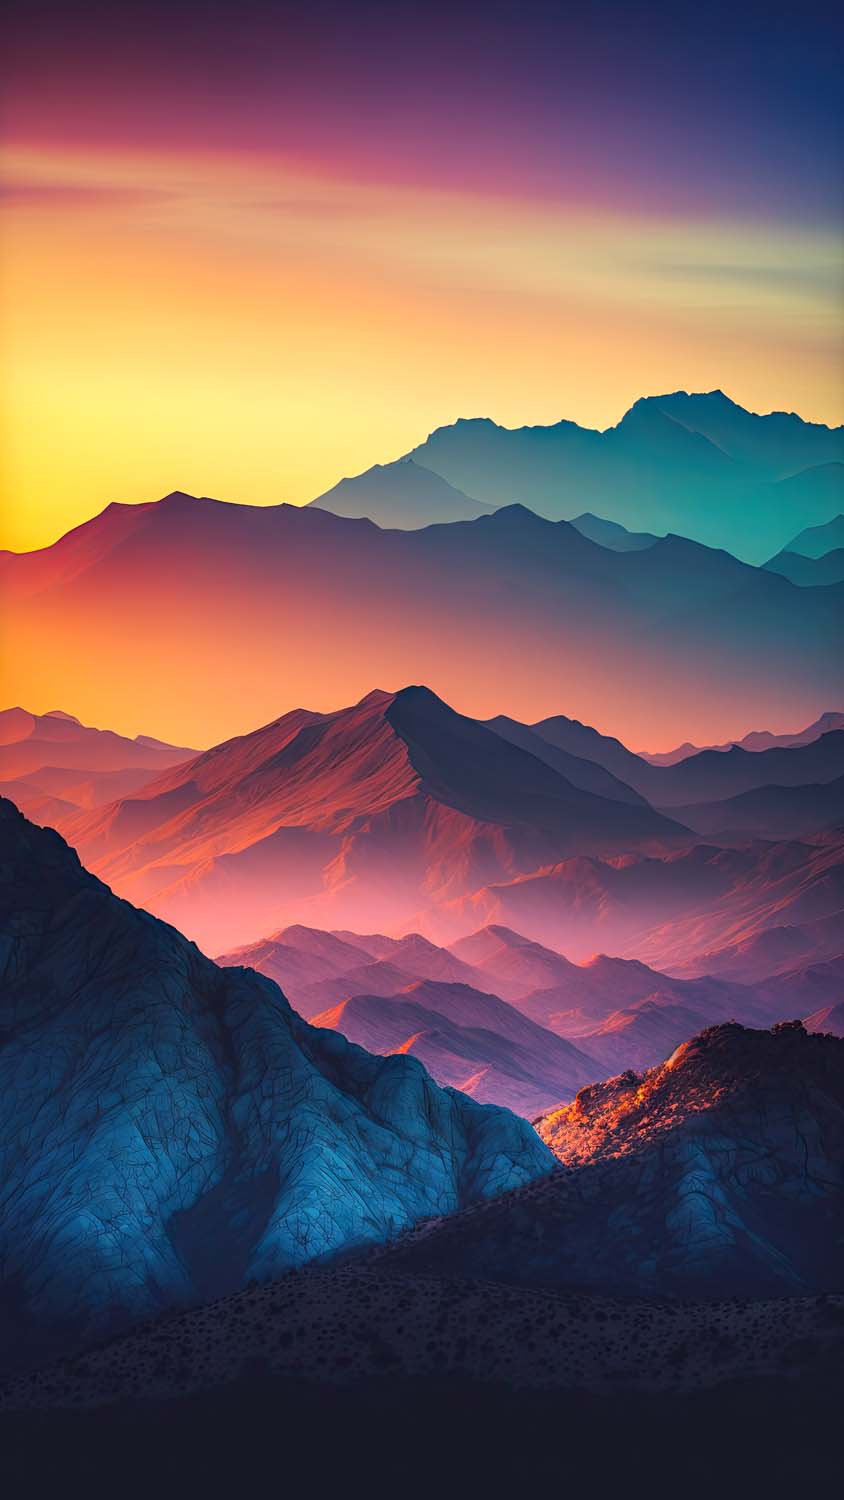 The best mountain wallpapers for iPhone - Crast.net